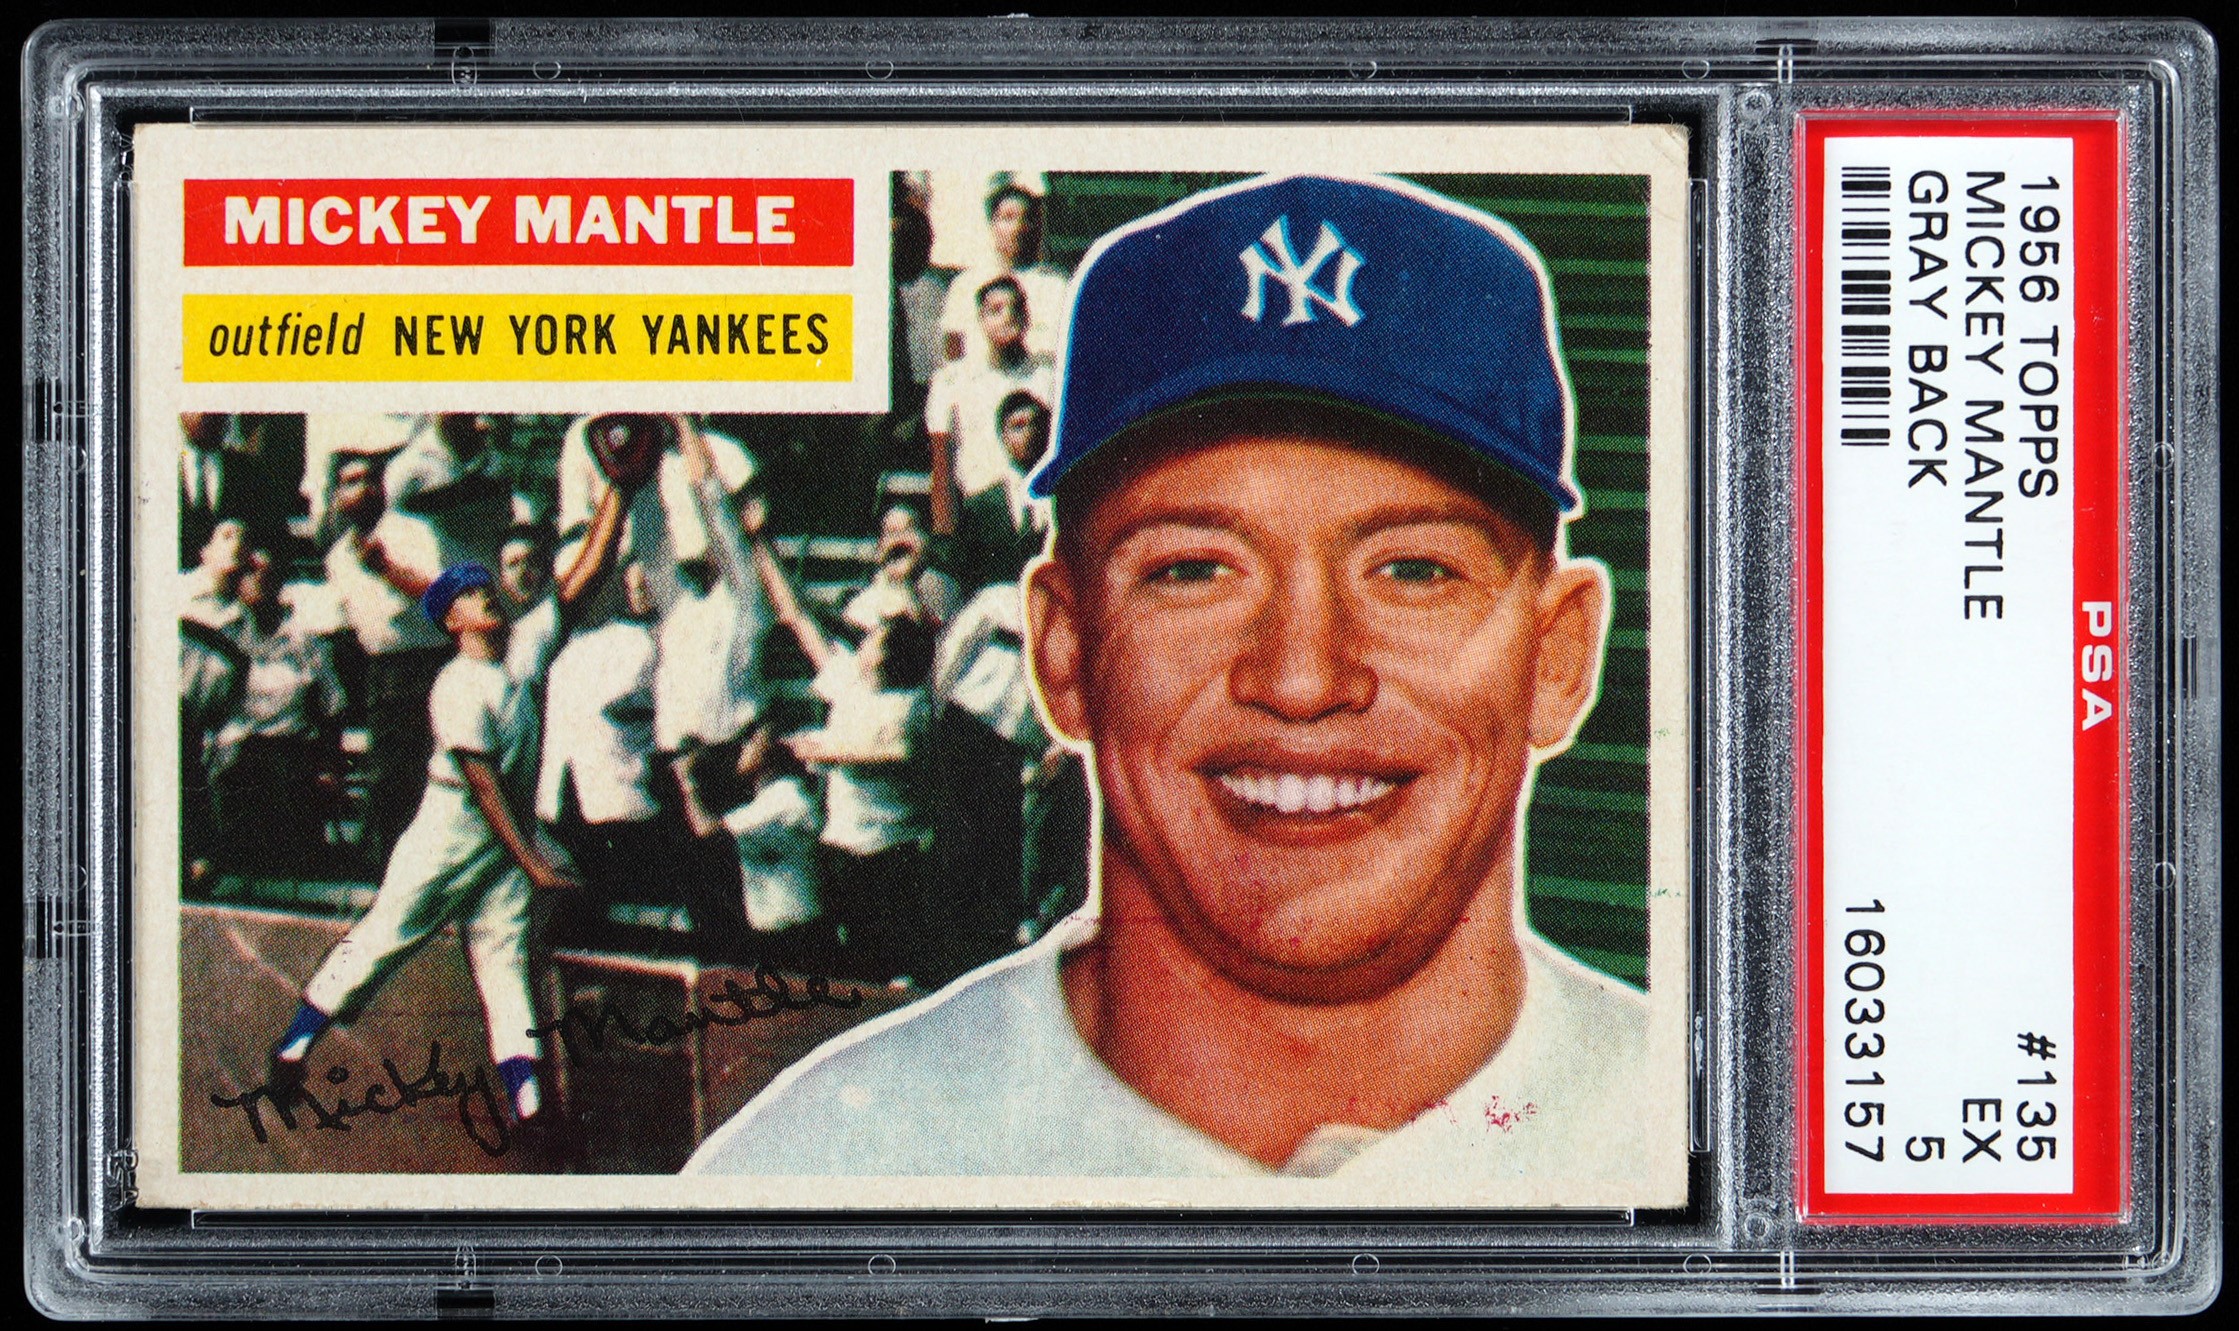 1956 Topps #135 Mickey Mantle (Gray Back) PSA EX 5